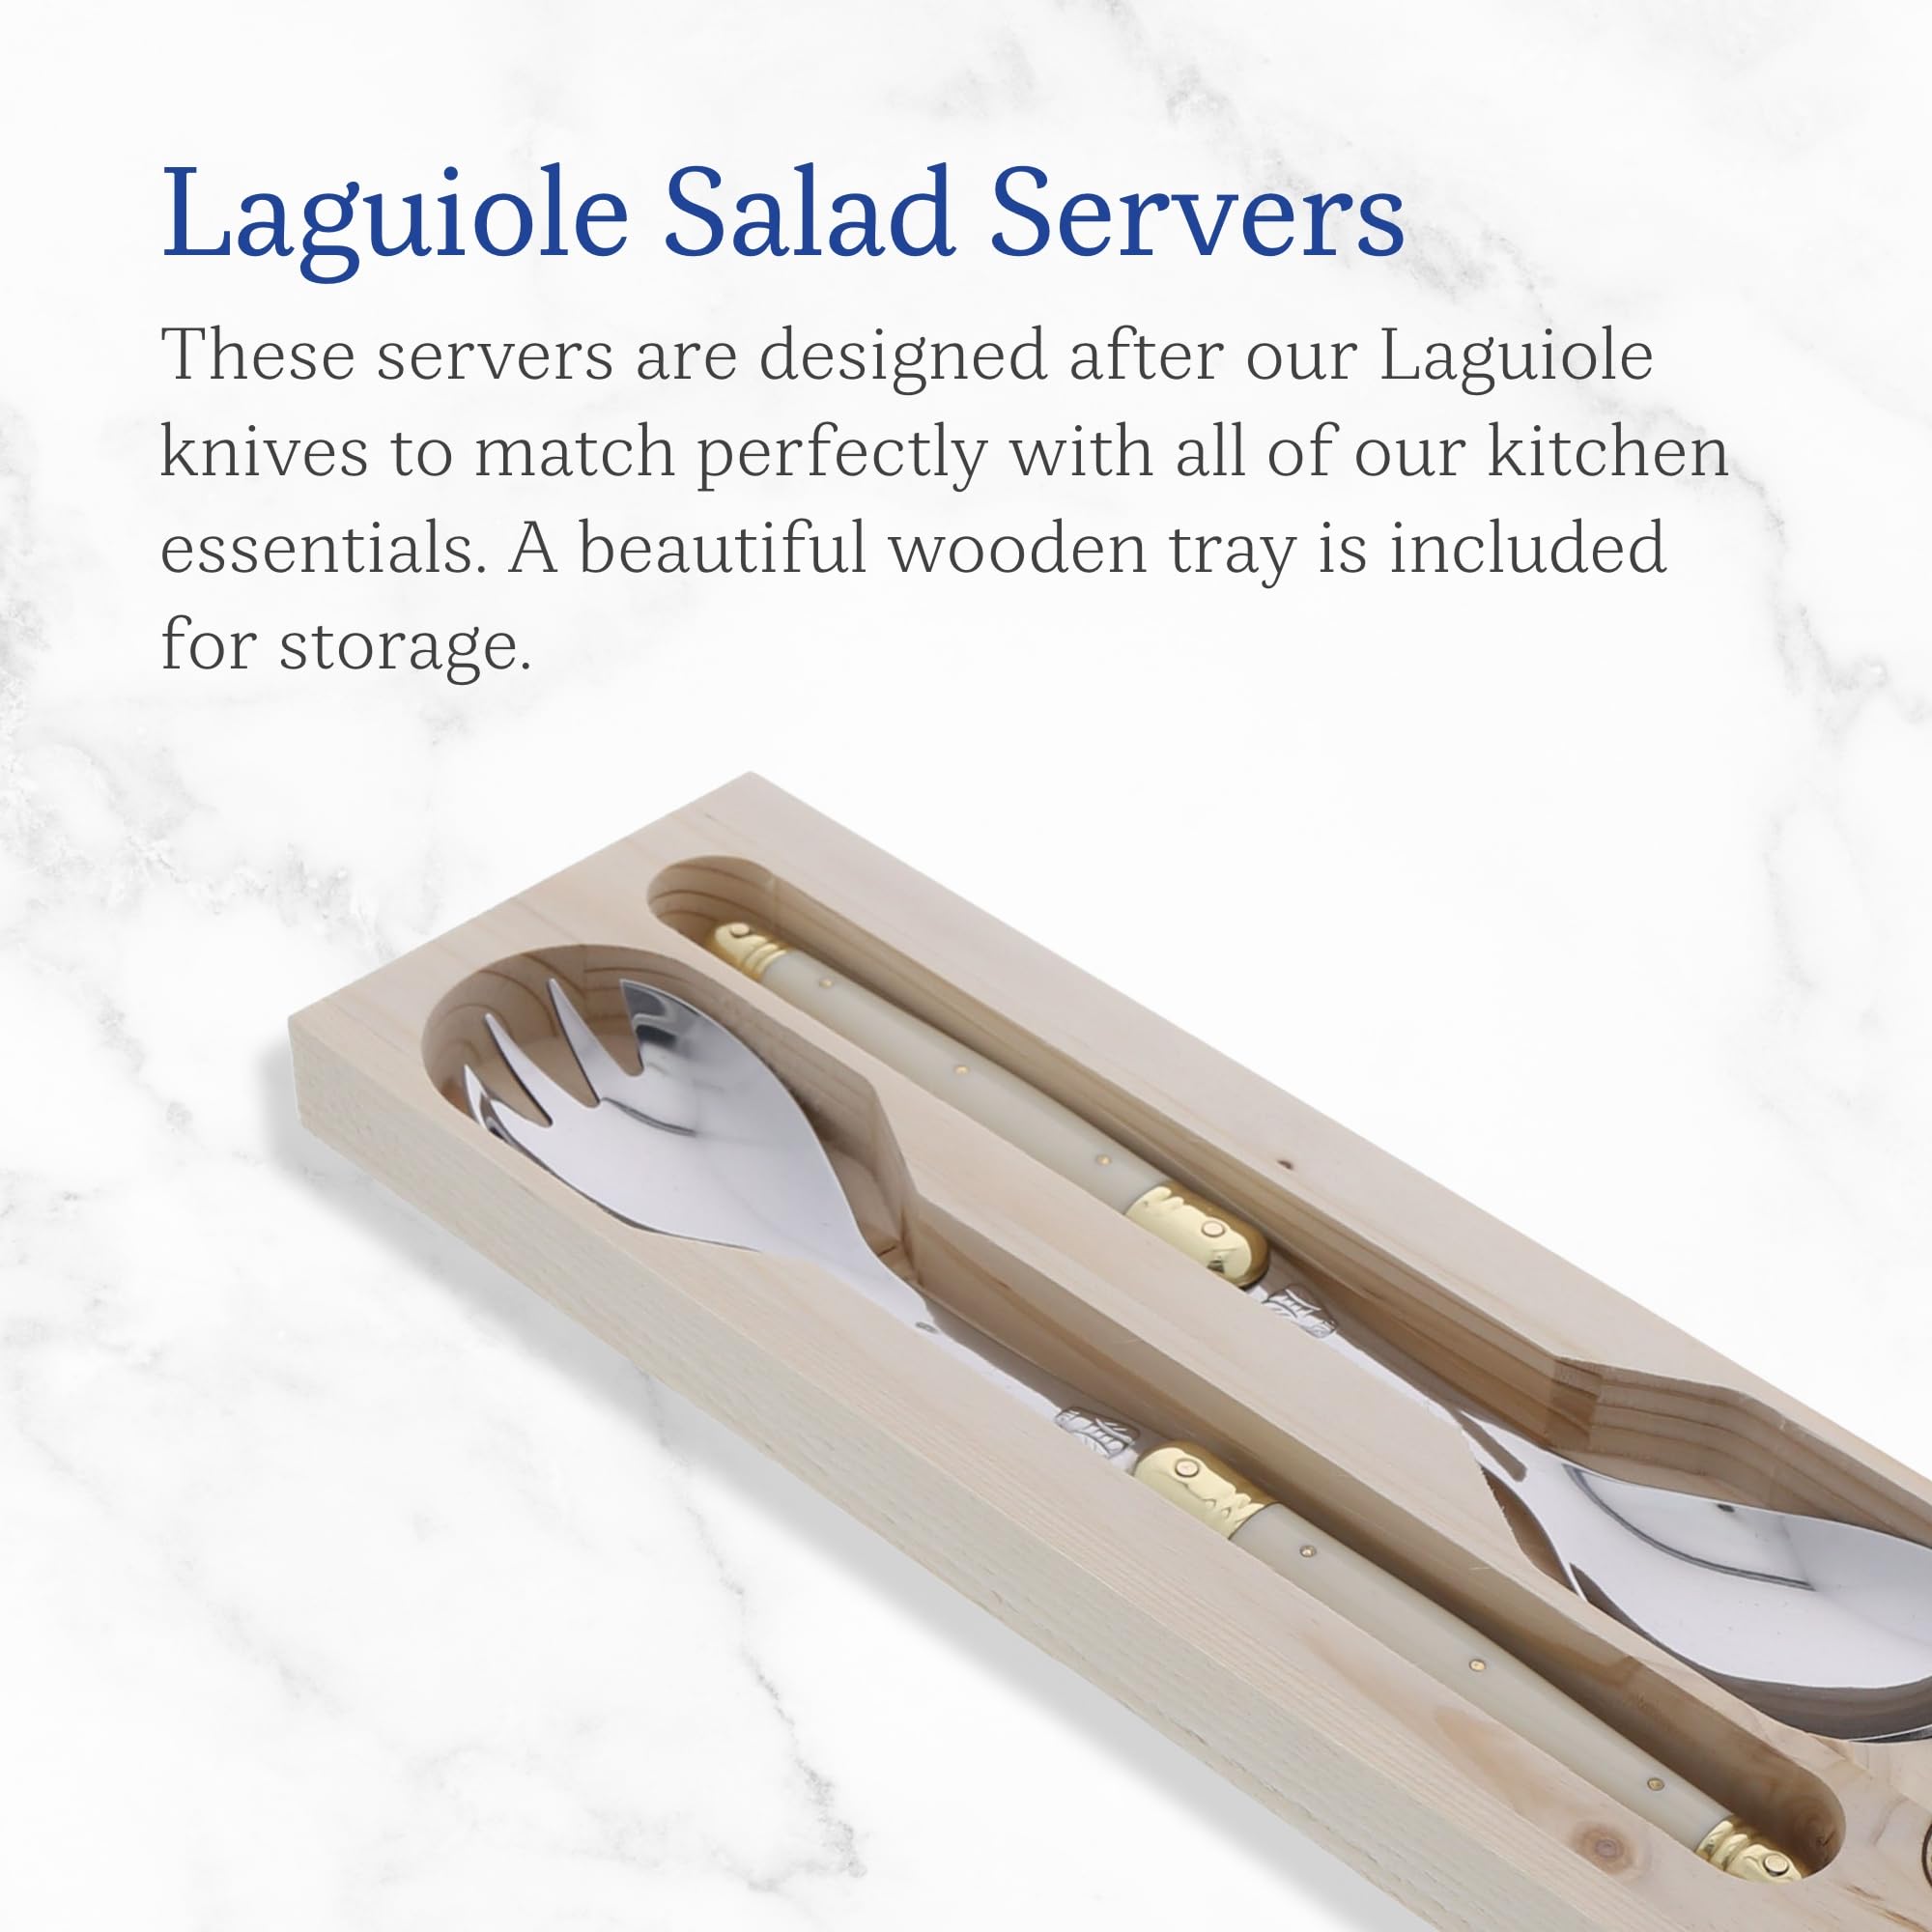 Jean Dubost Salad Servers, Ivory Handles - Rust-Resistant Stainless Steel - Includes Wooden Tray - Made in France